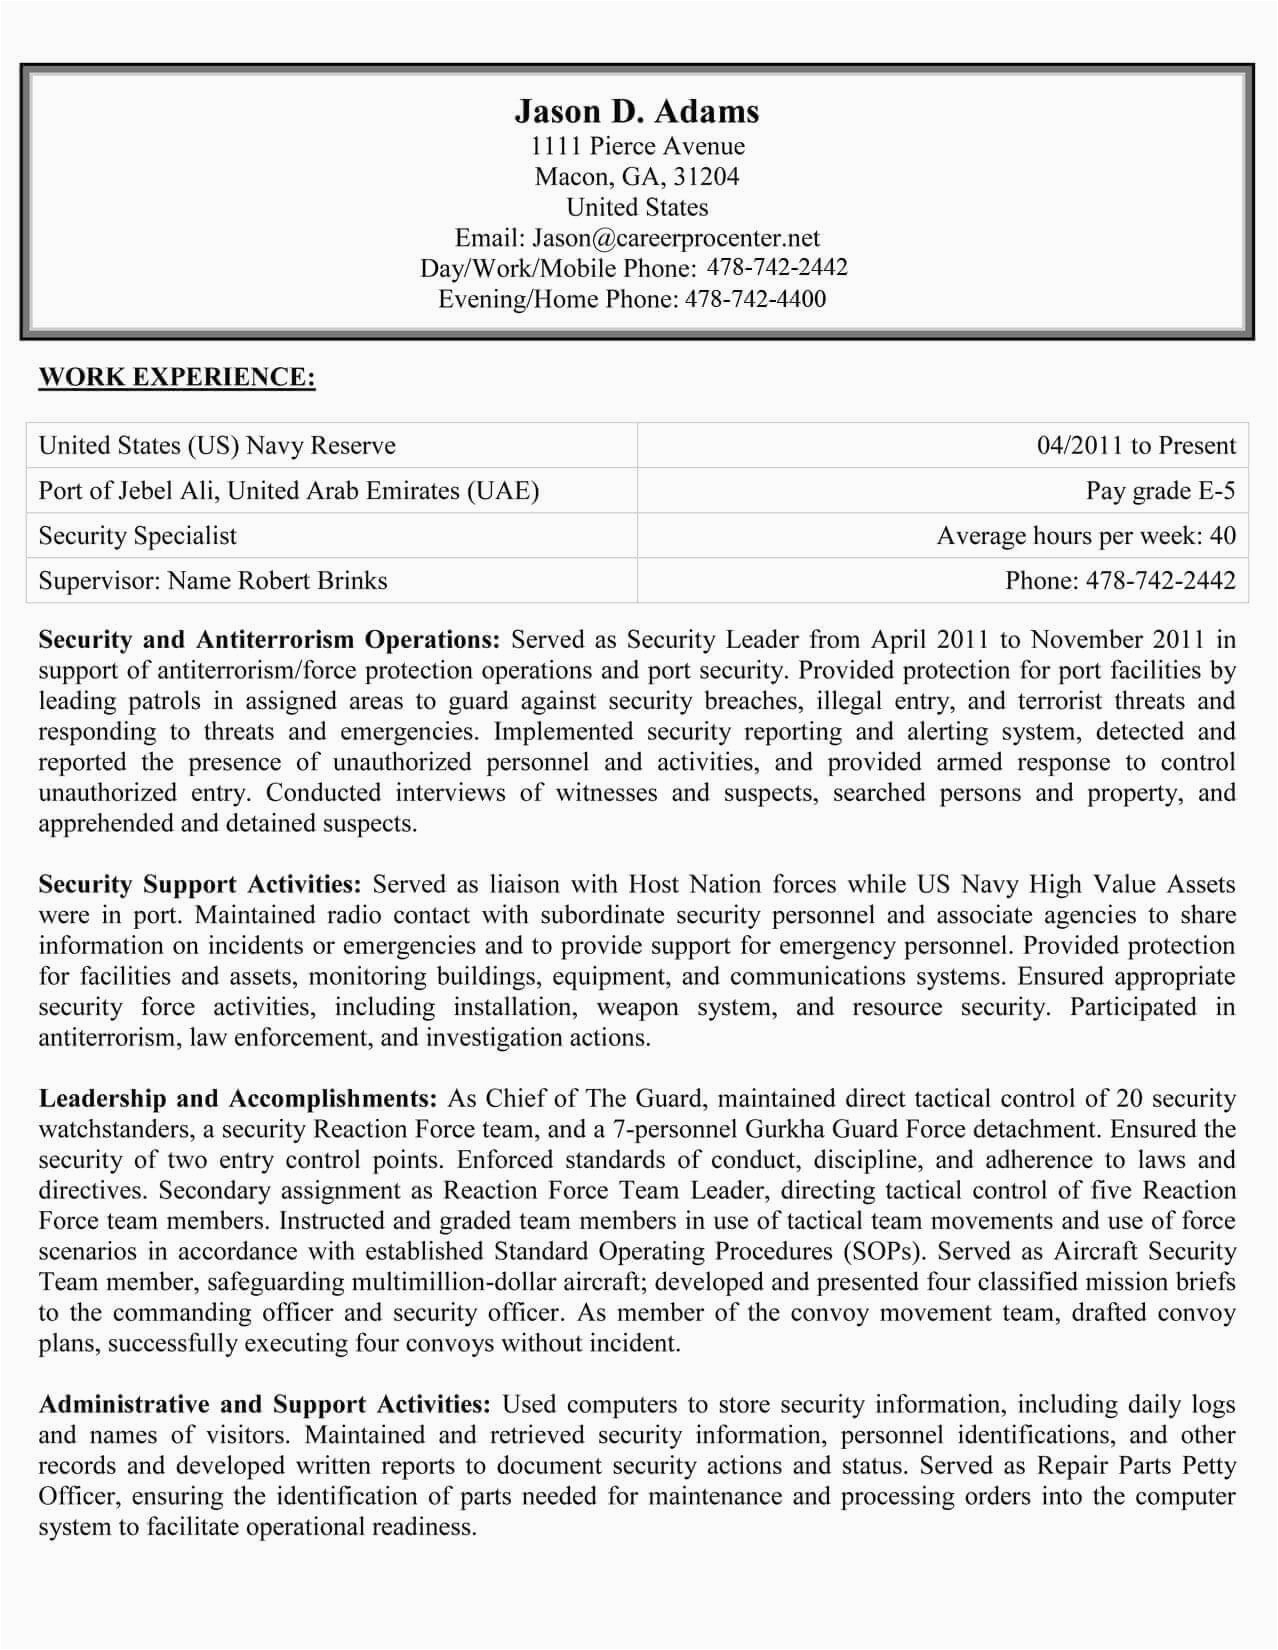 Resume Samples In Outline format Federal Applications Federal Resume Tips Examples & Templates